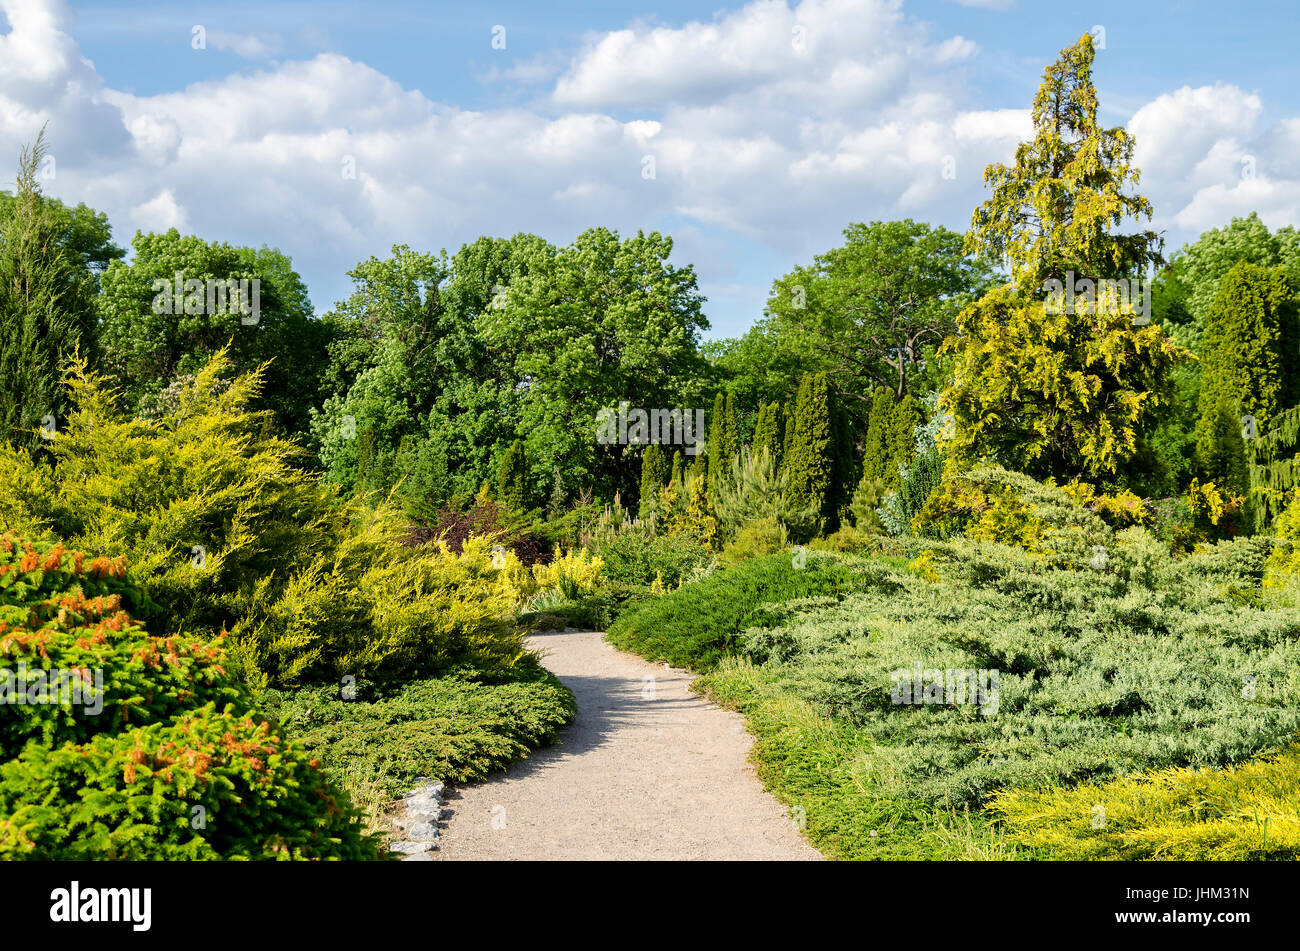 Road in the summer park with summer grass, mixed grass, coniferous trees and shrubs Stock Photo